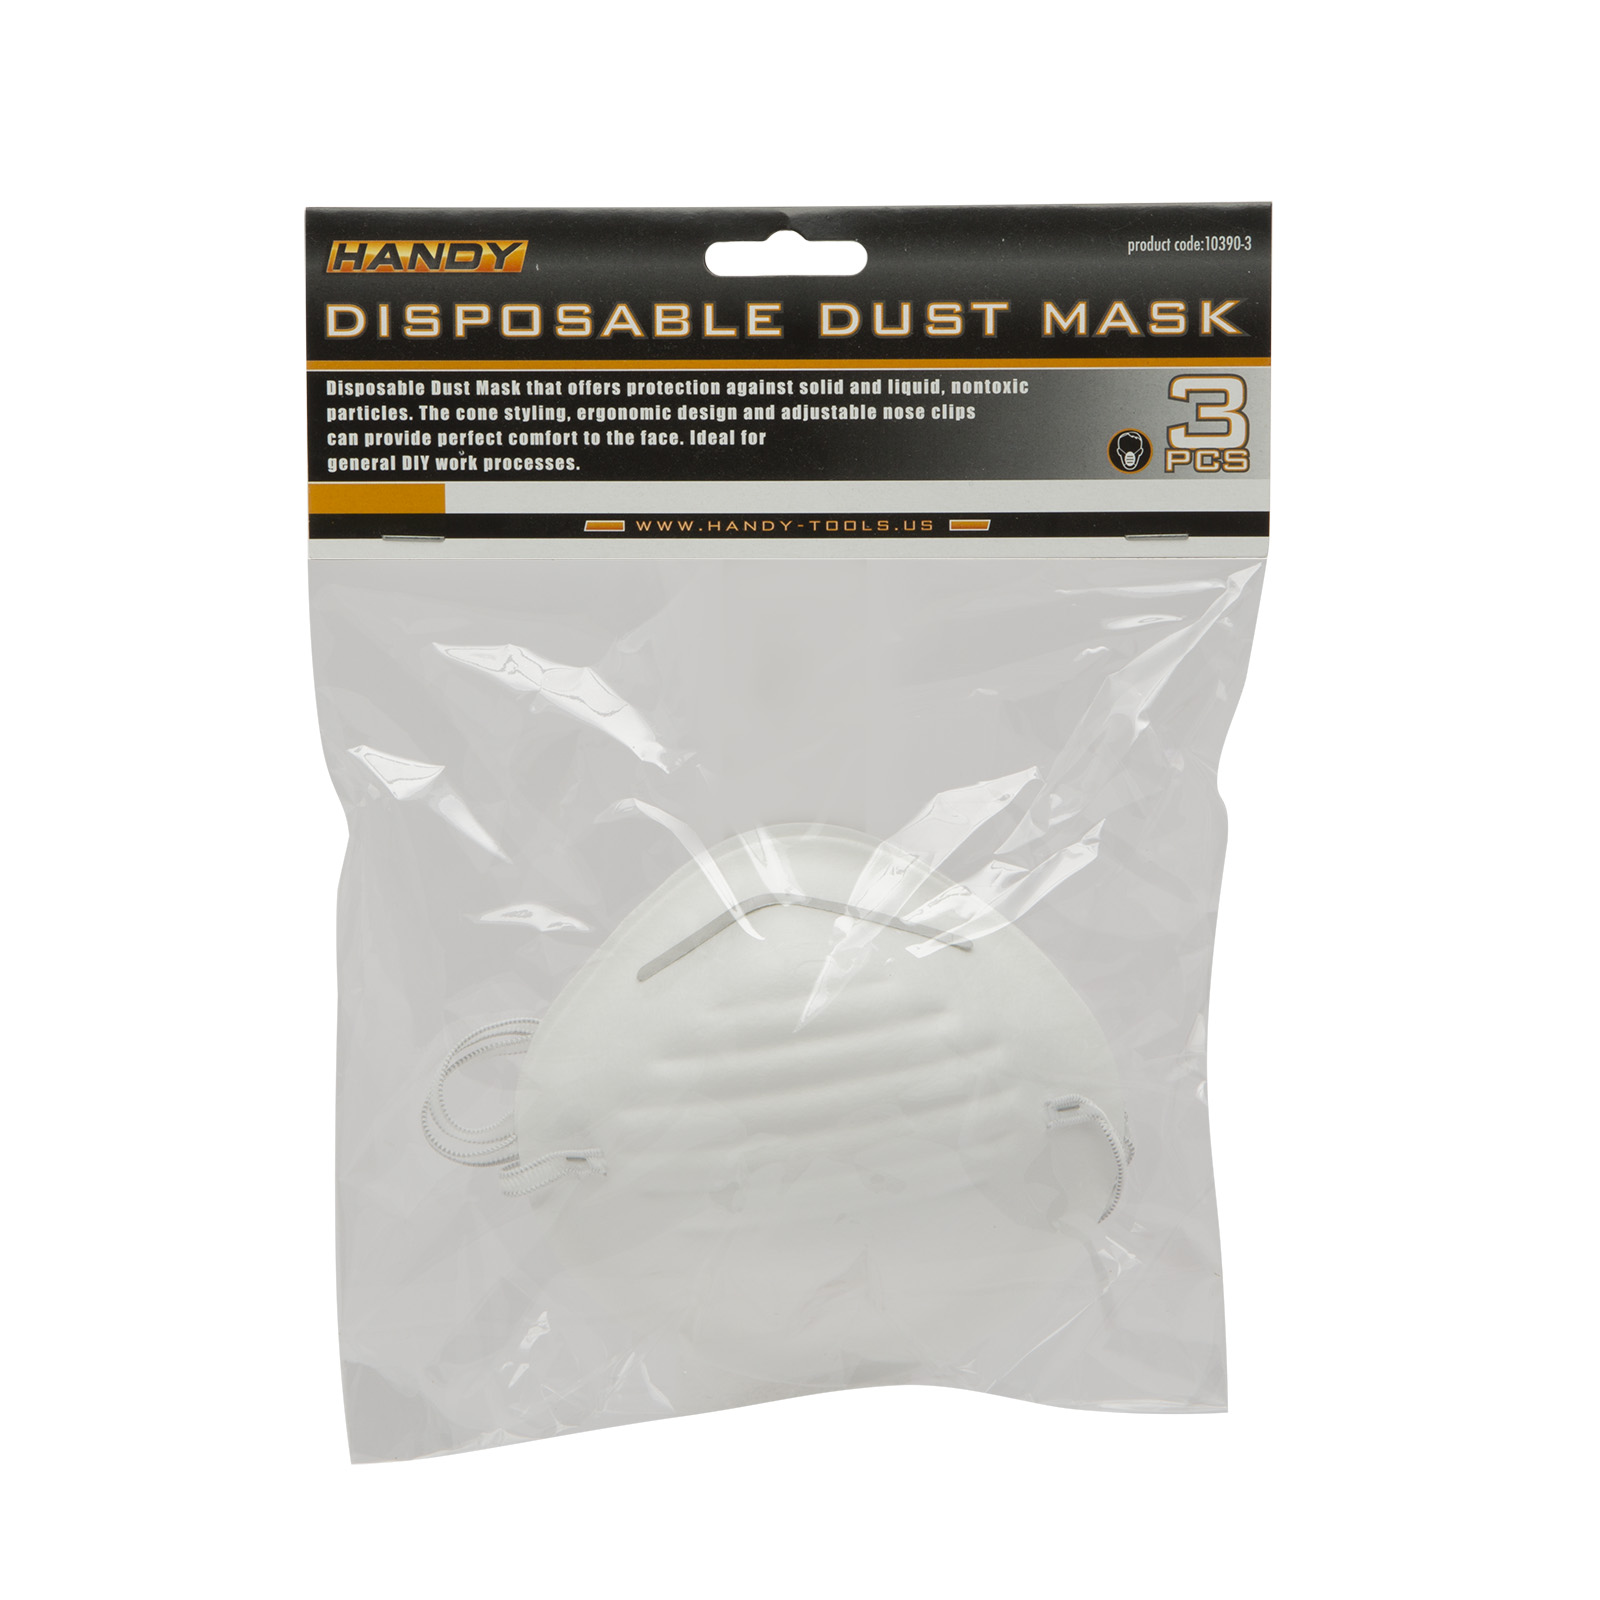 Disposable Dust Mask thumb